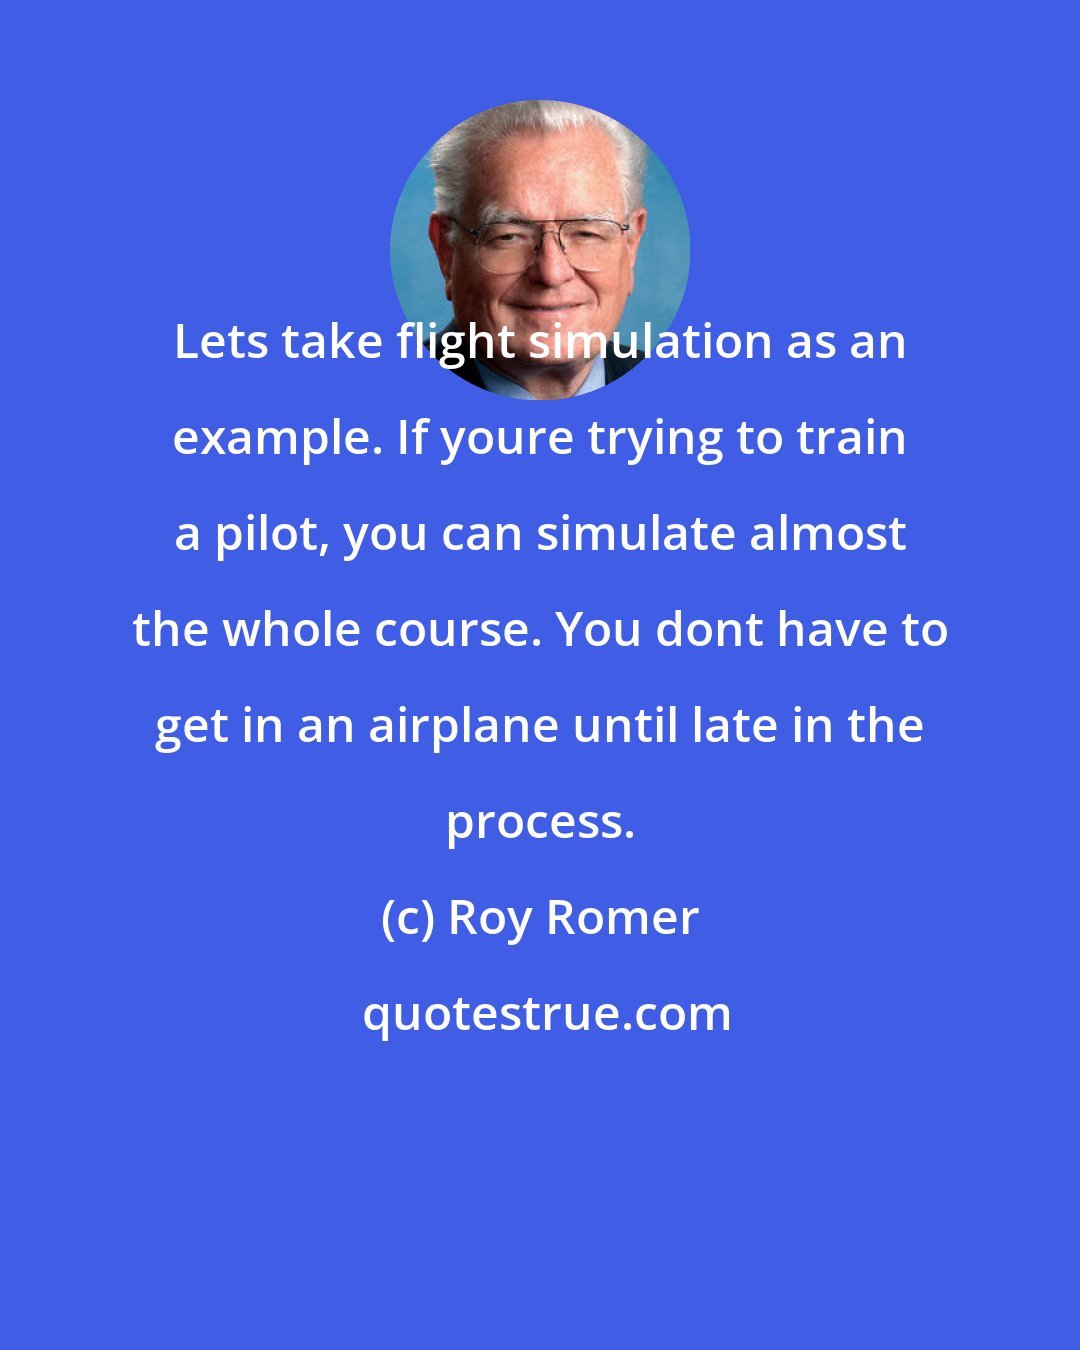 Roy Romer: Lets take flight simulation as an example. If youre trying to train a pilot, you can simulate almost the whole course. You dont have to get in an airplane until late in the process.